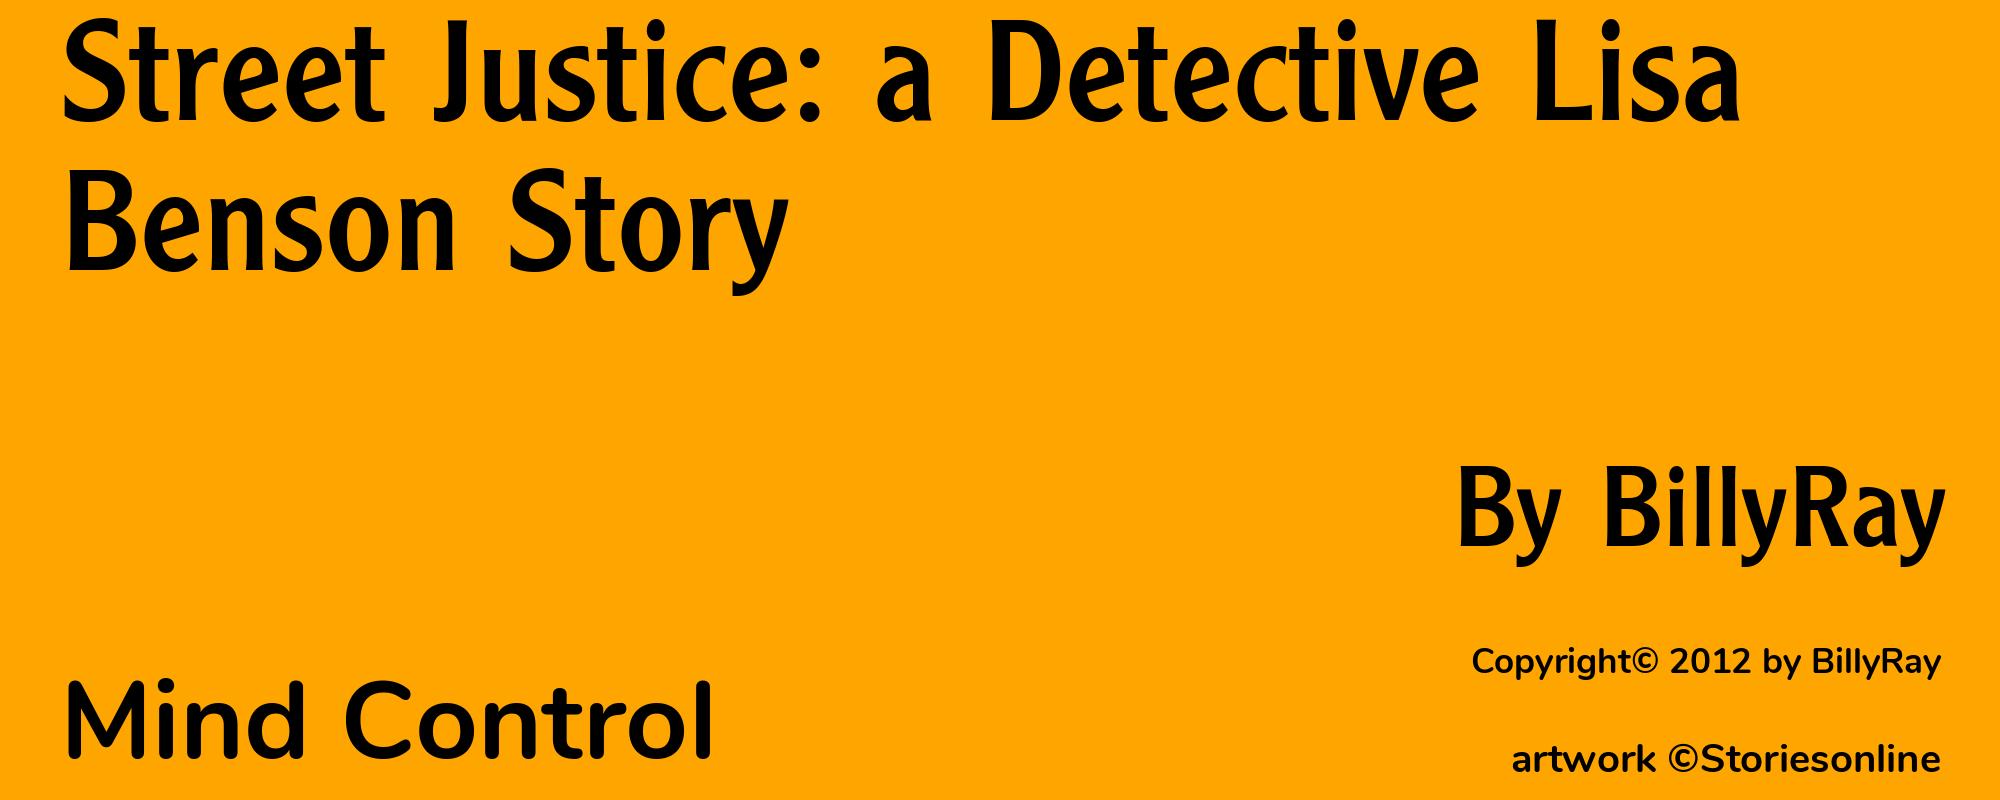 Street Justice: a Detective Lisa Benson Story - Cover